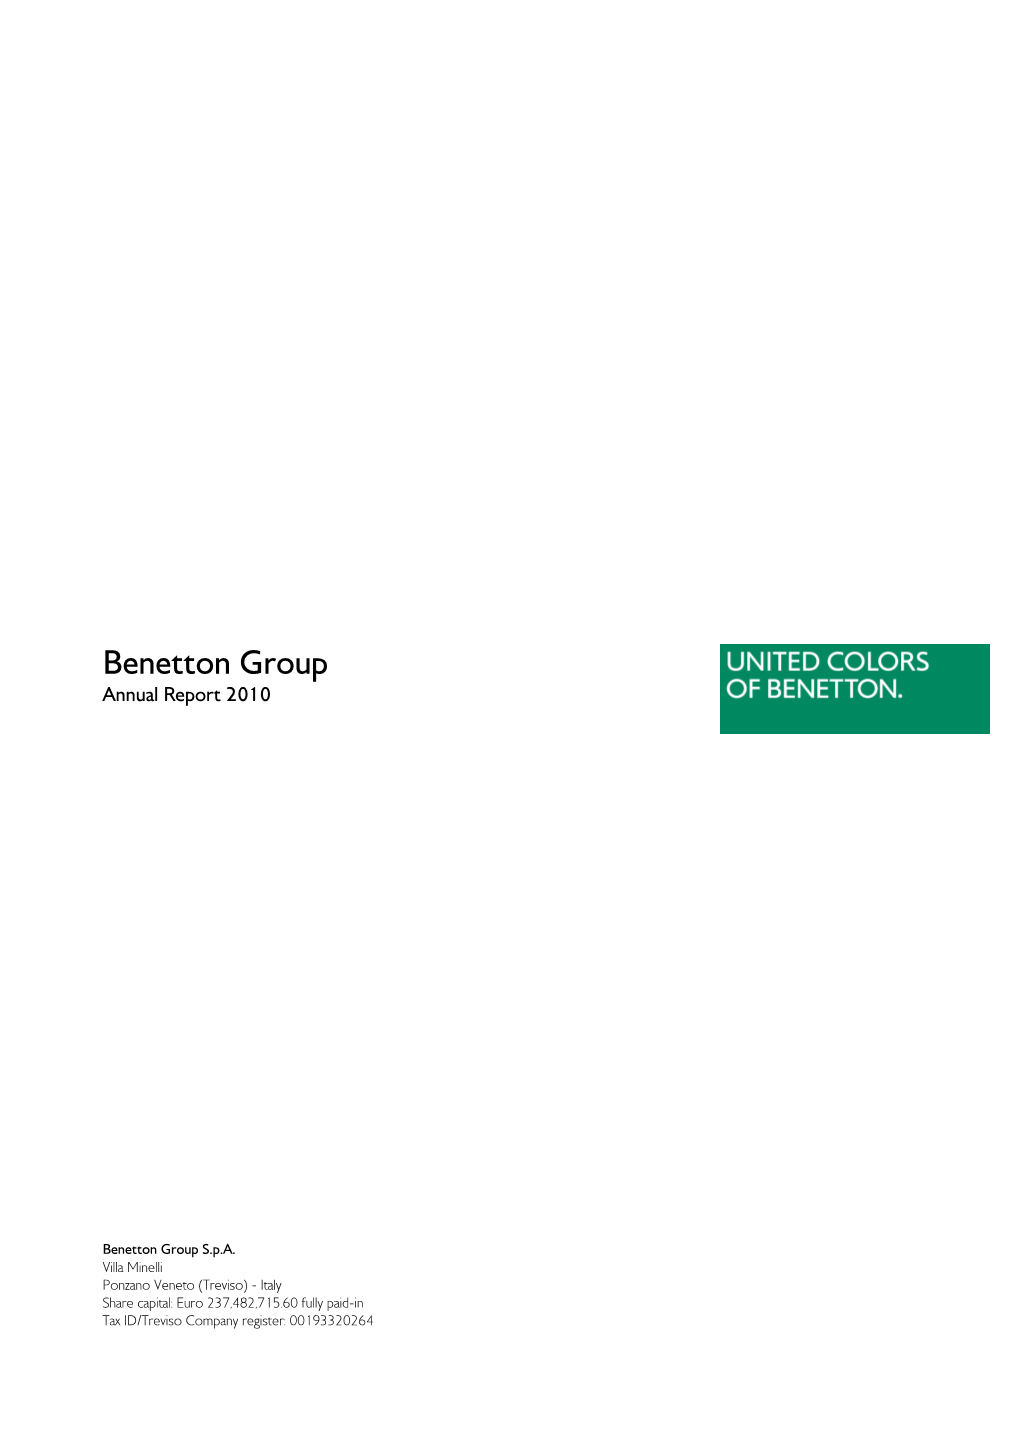 Benetton Group Annual Report 2010